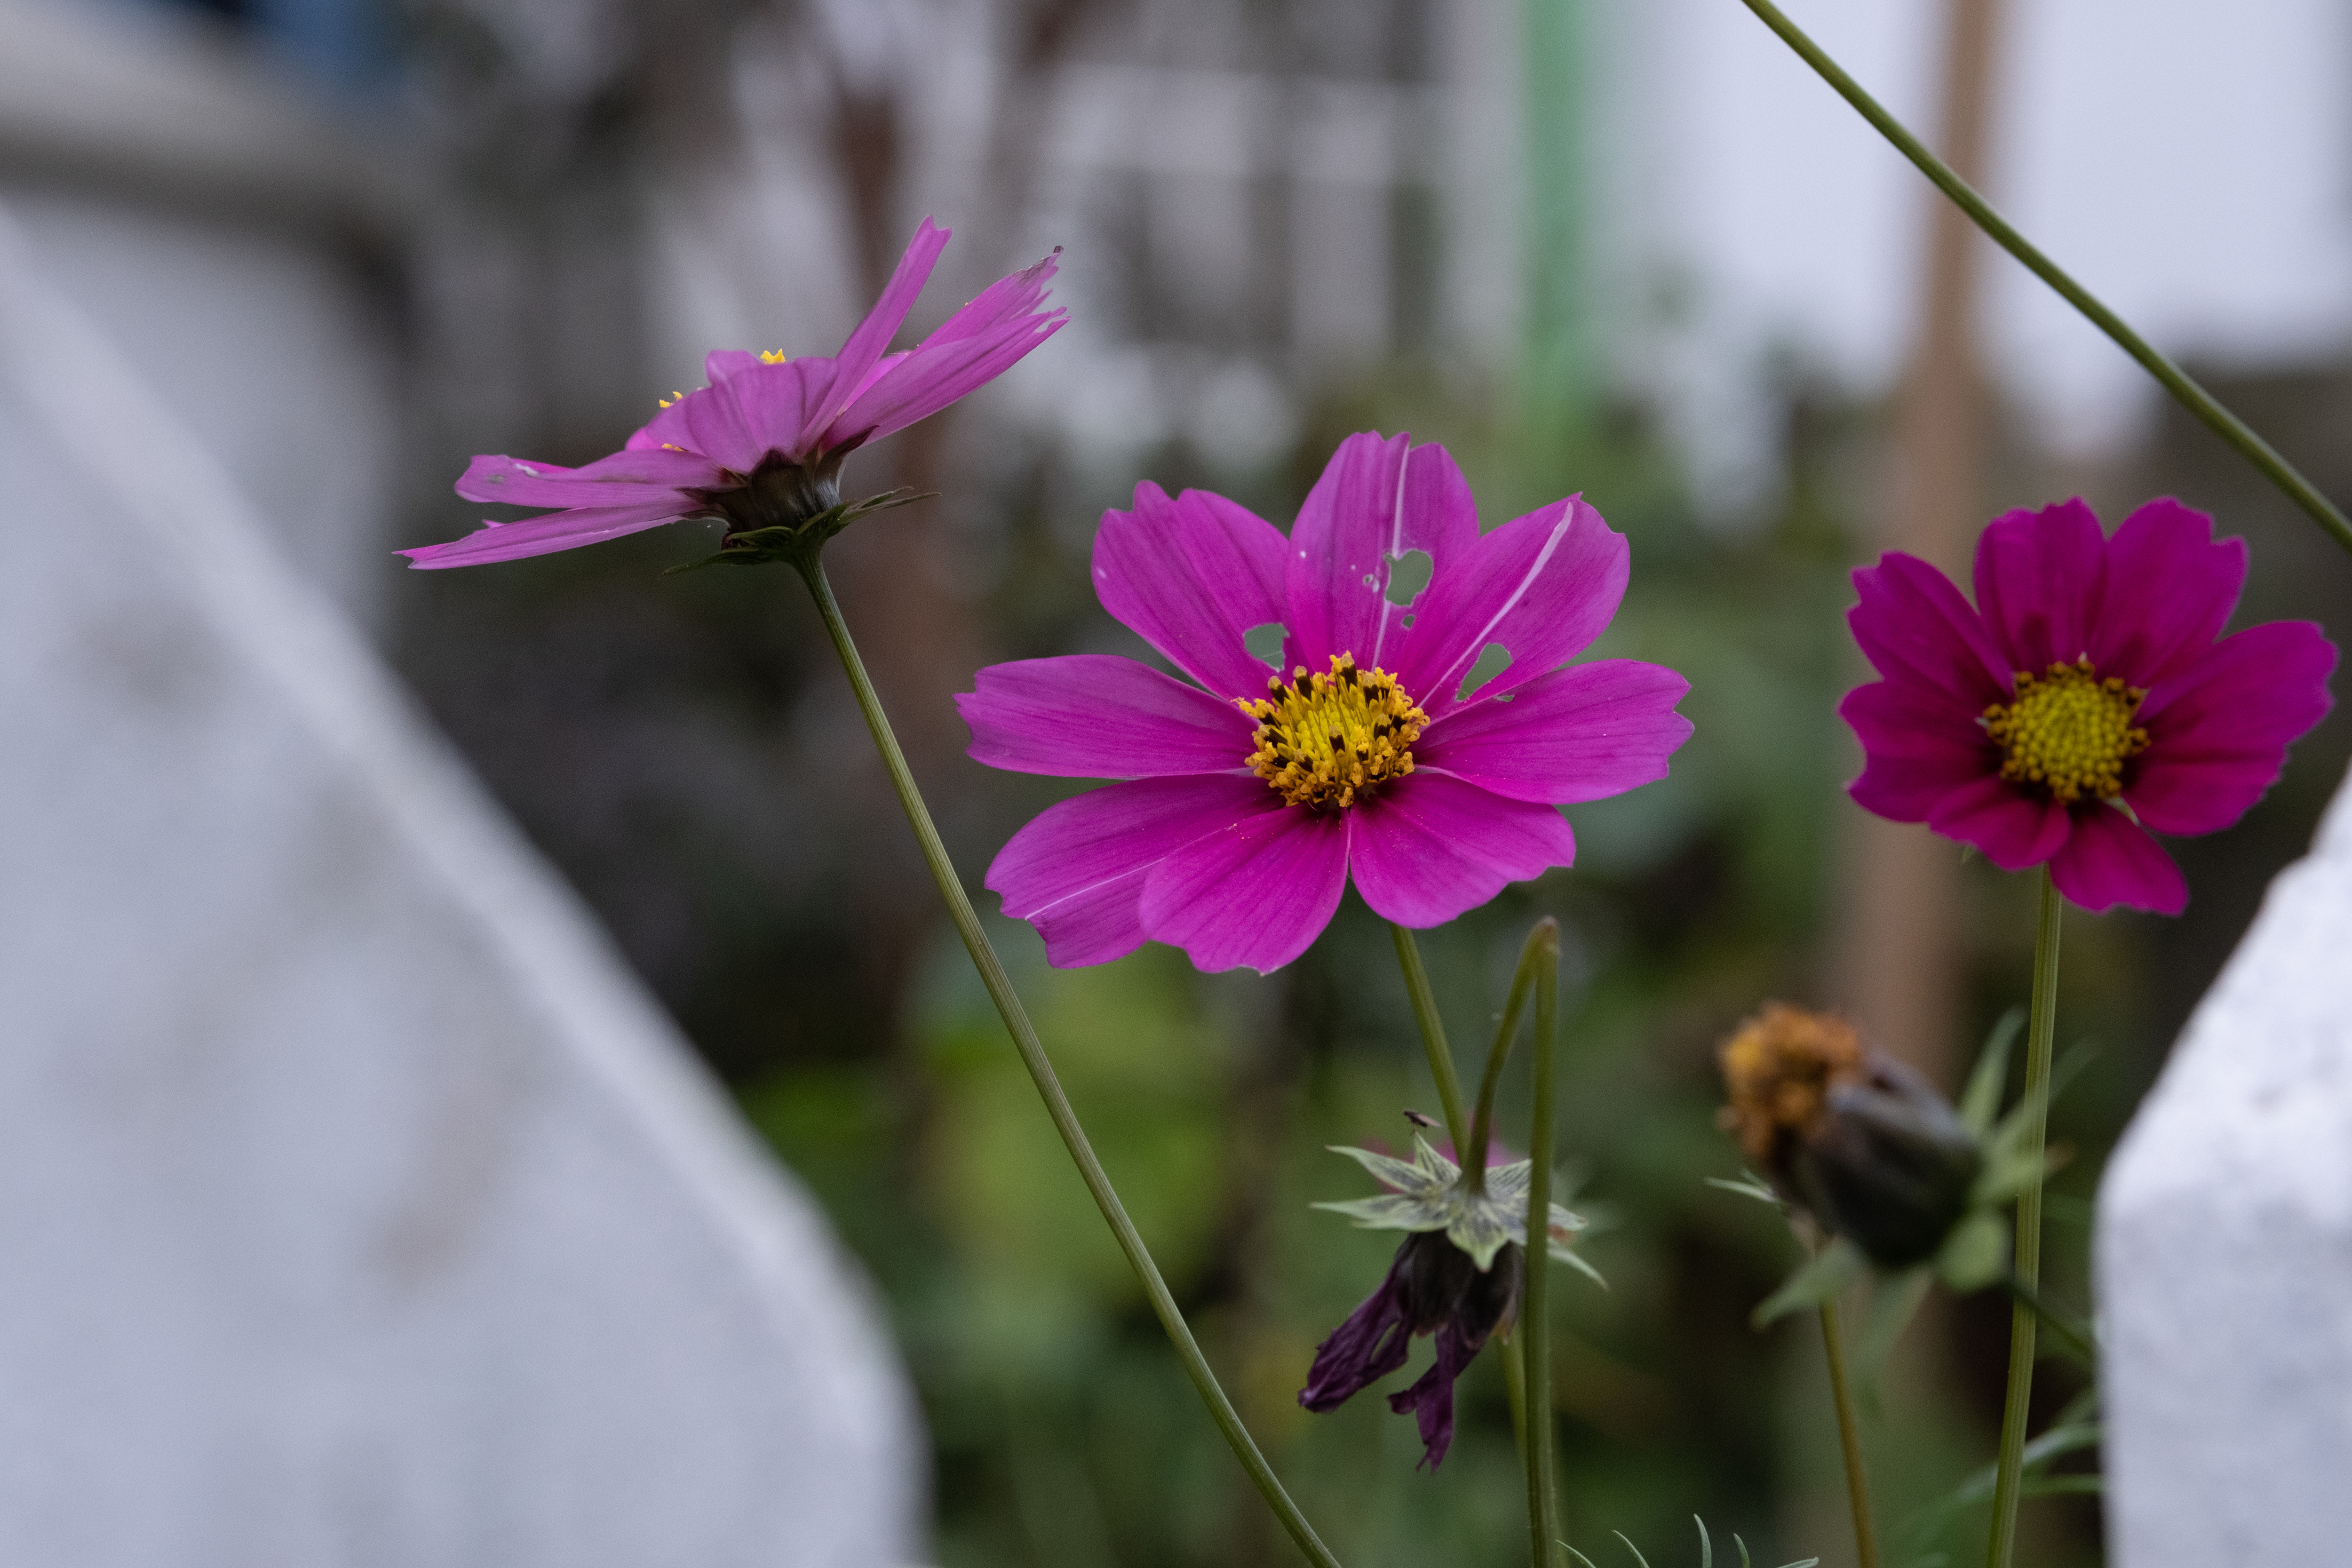 A purple flower behind a white picket fence